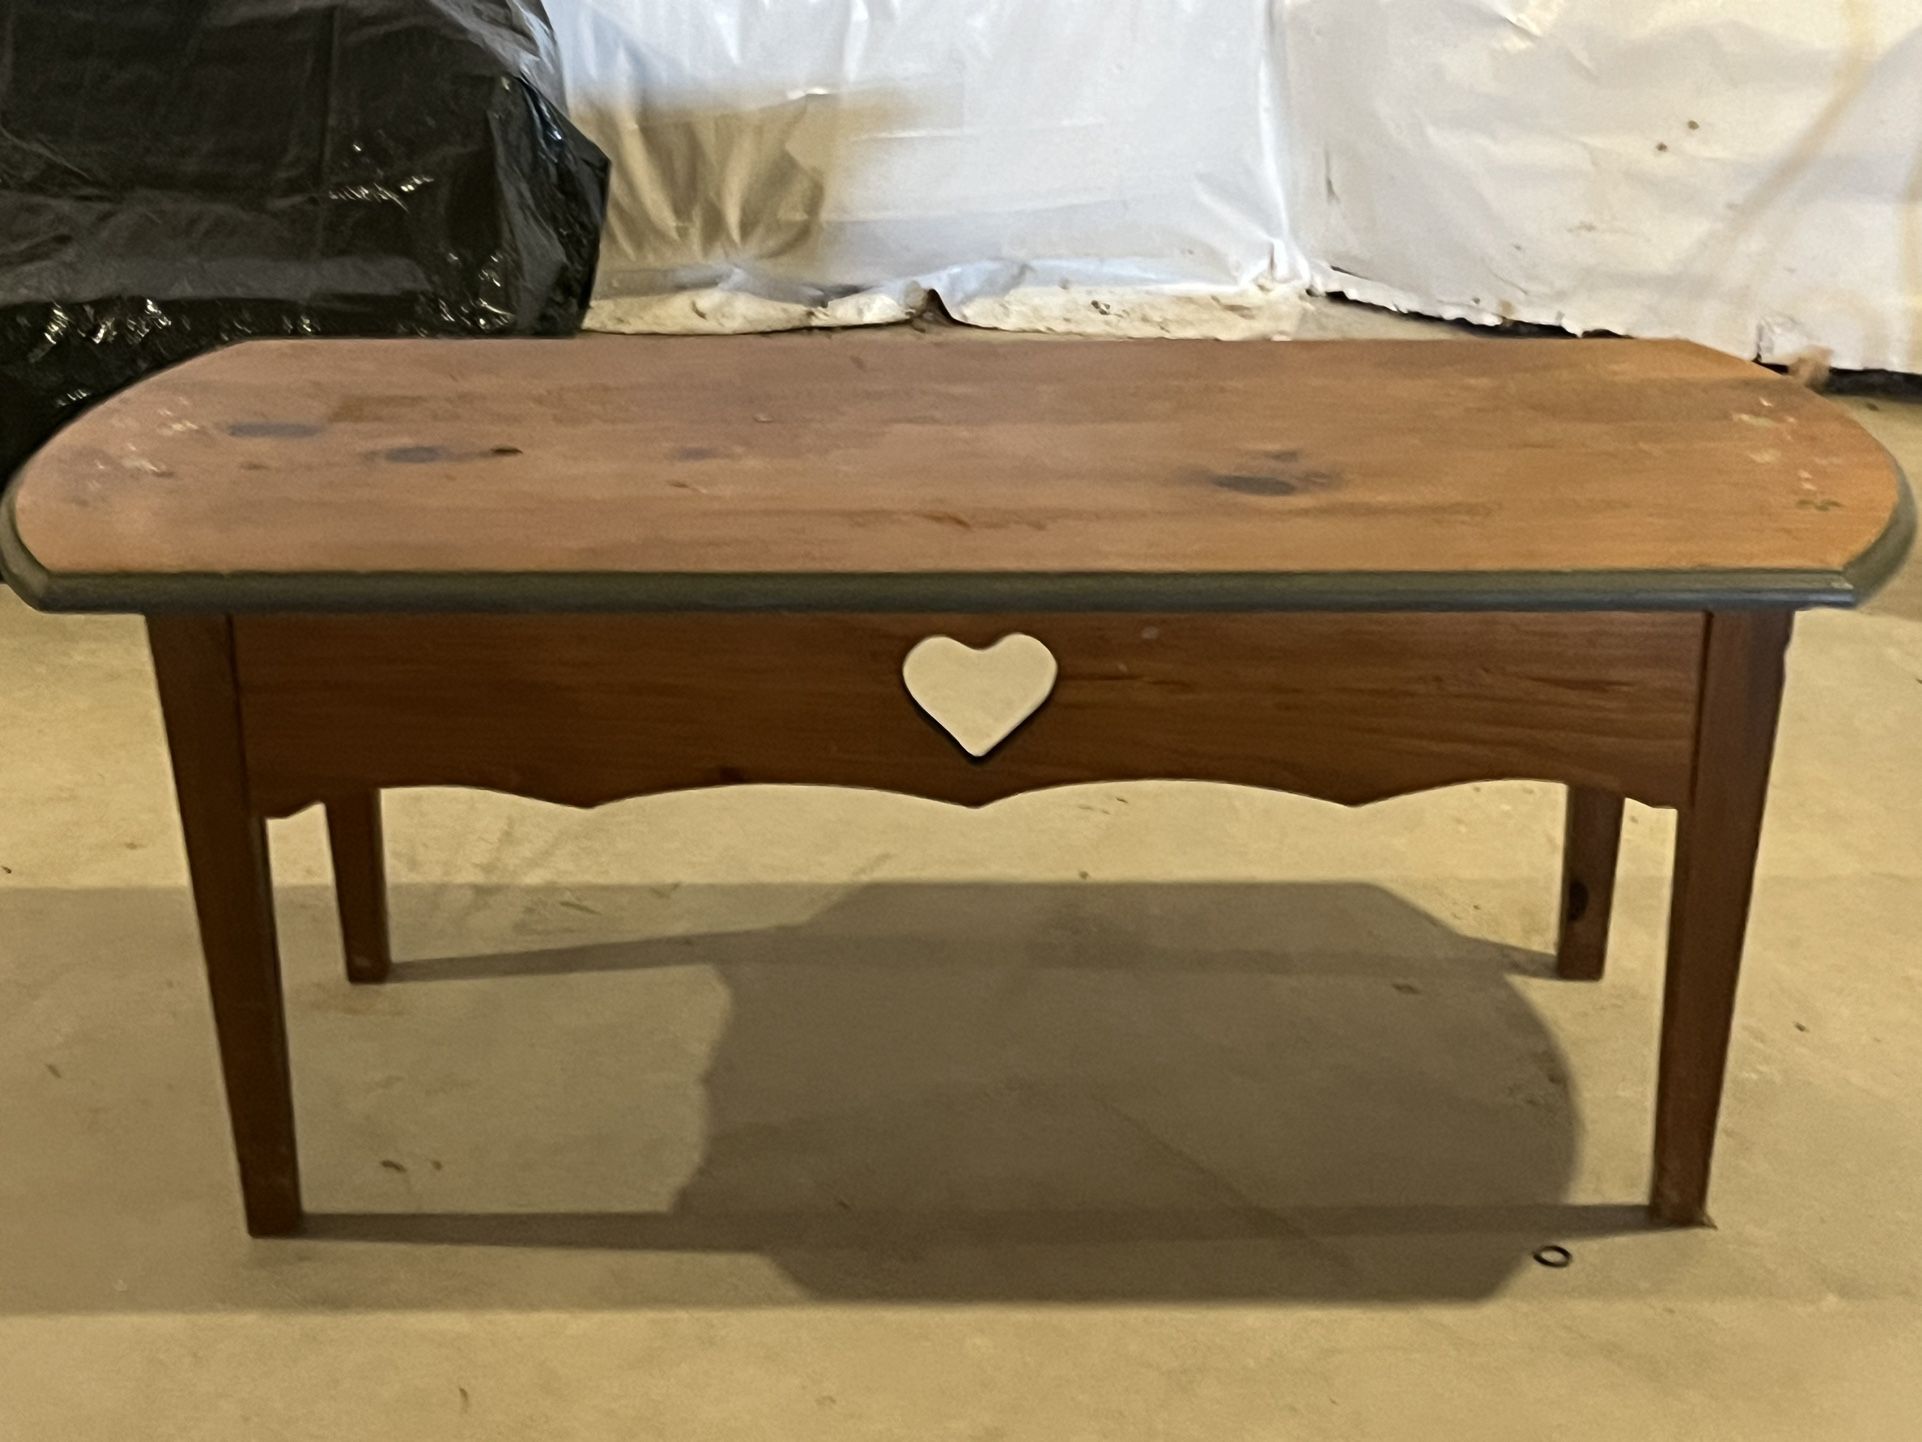 PINE COUNTRY COFFEE TABLE HEART CUT OUT & PAINTED FLOWERS